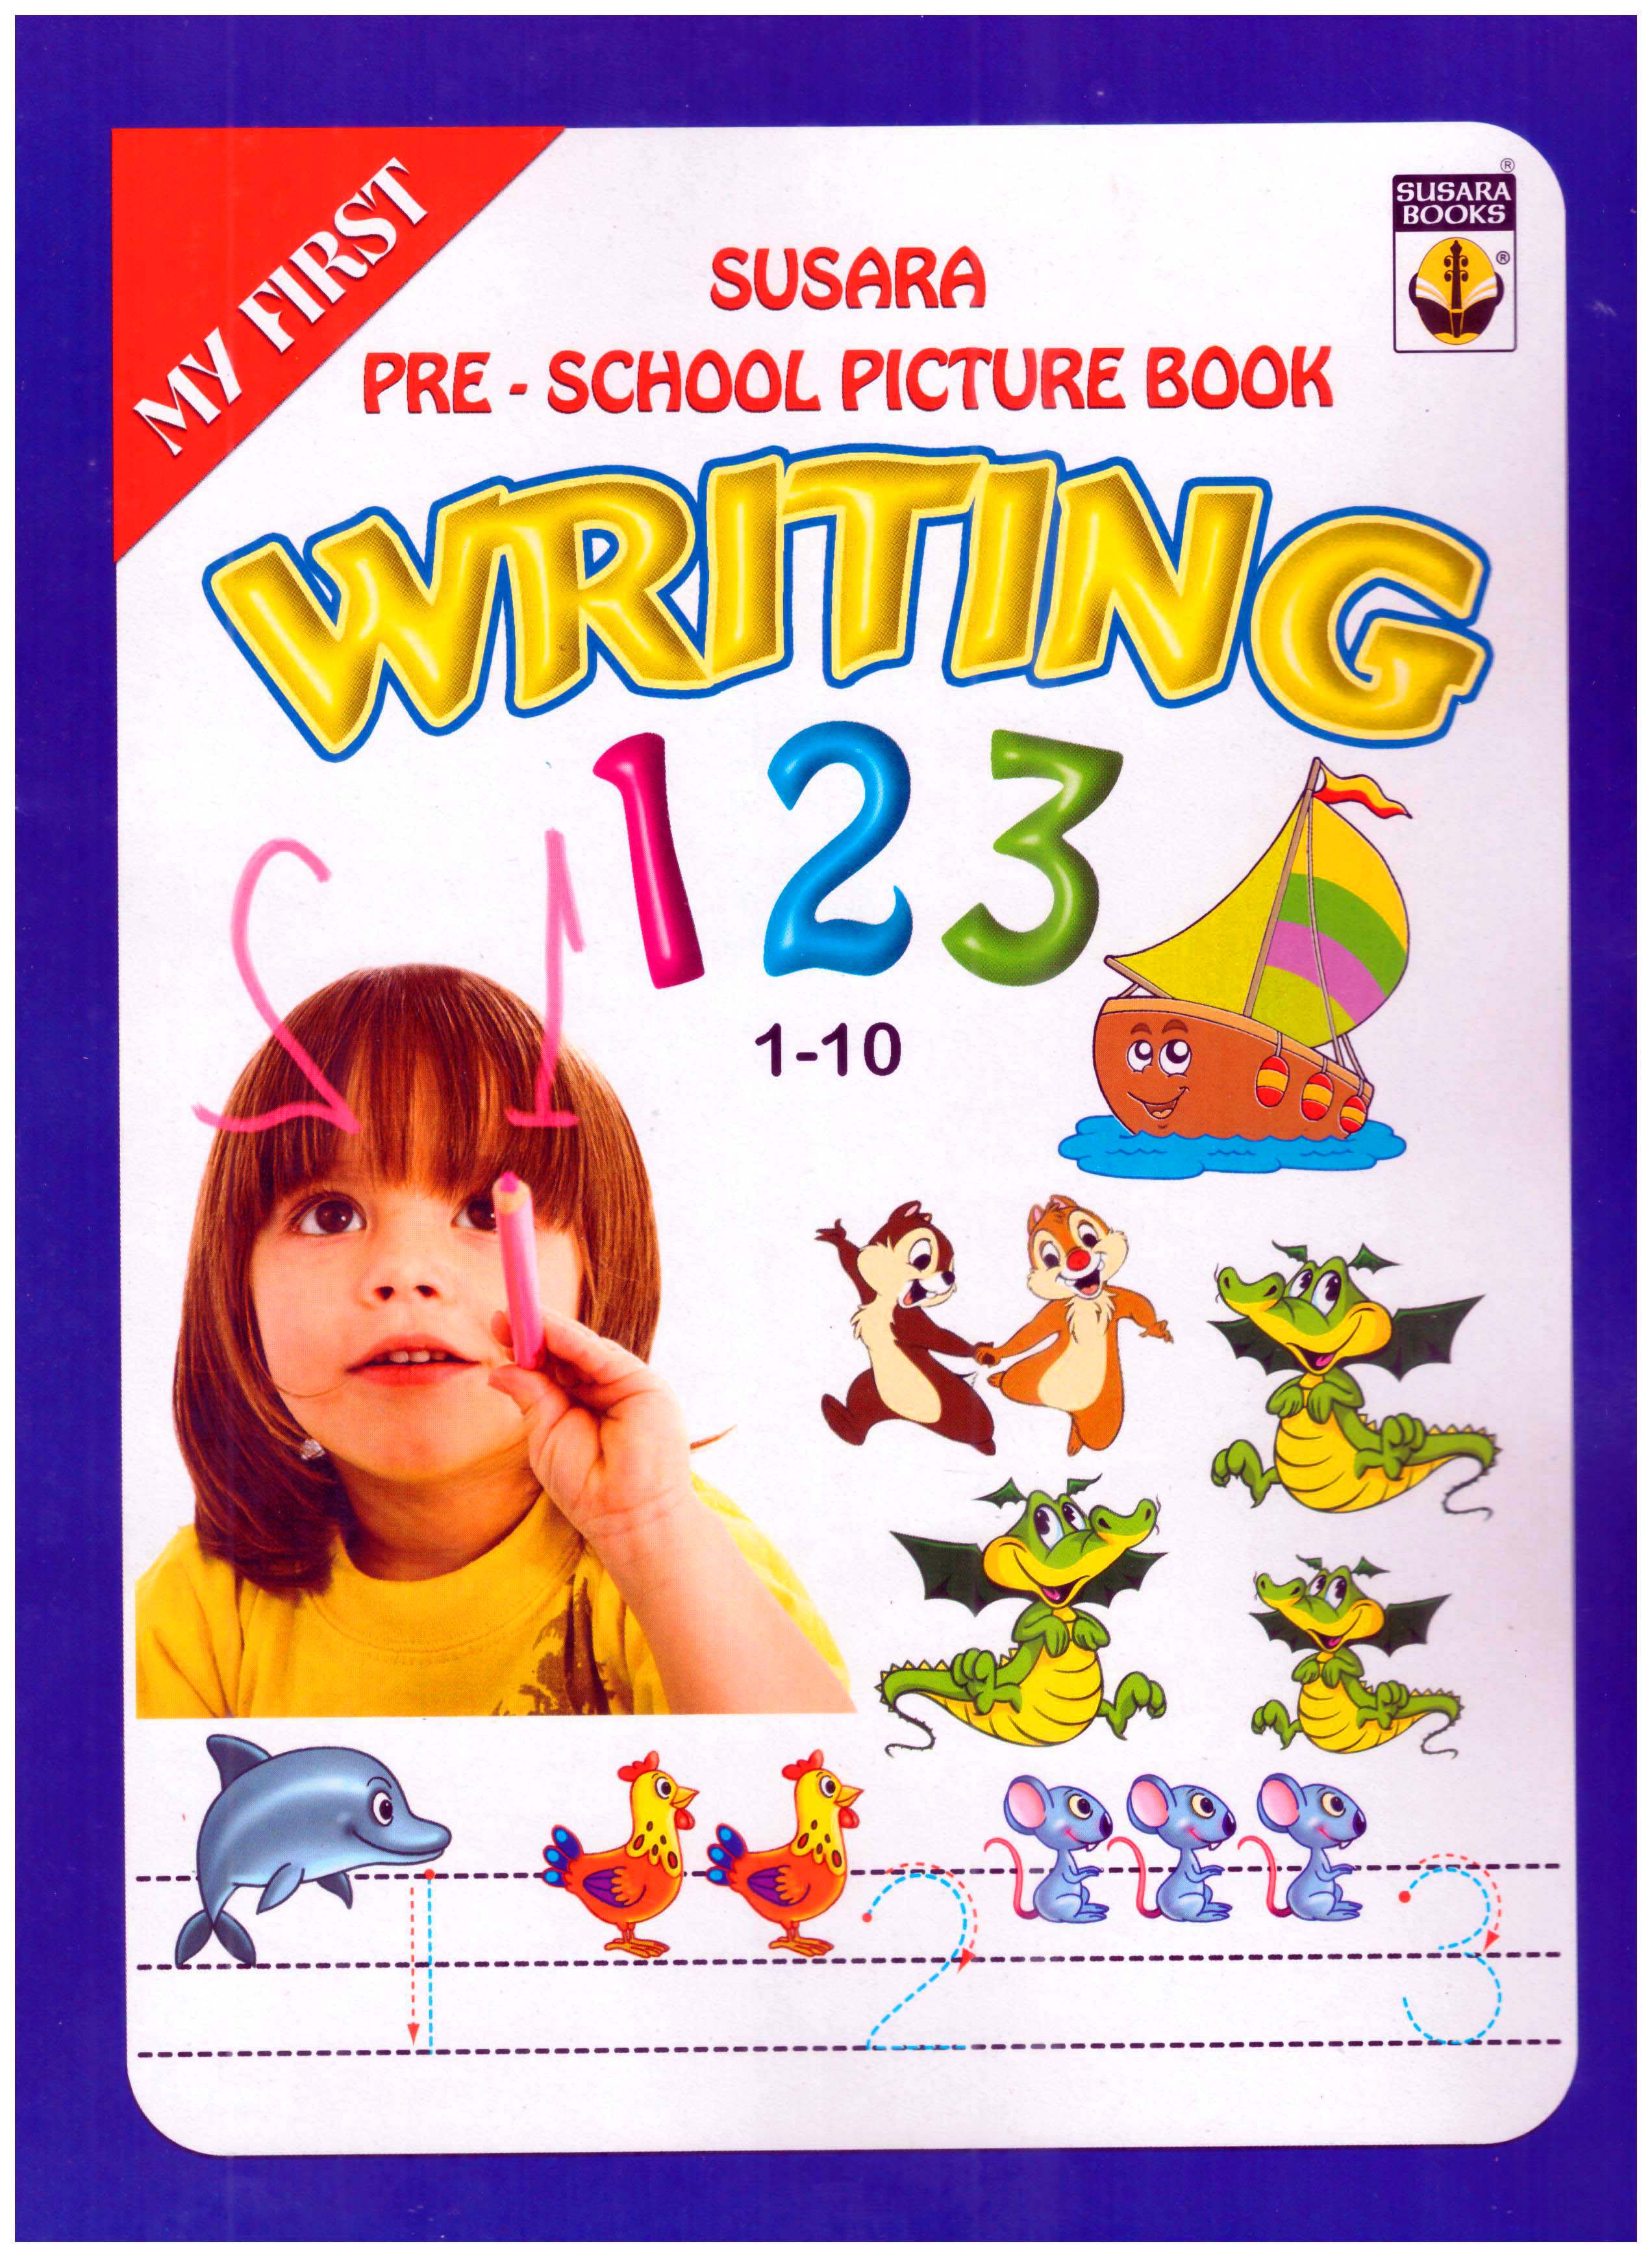 My First Susara Pre-School Picture Book Writing 123 1-10